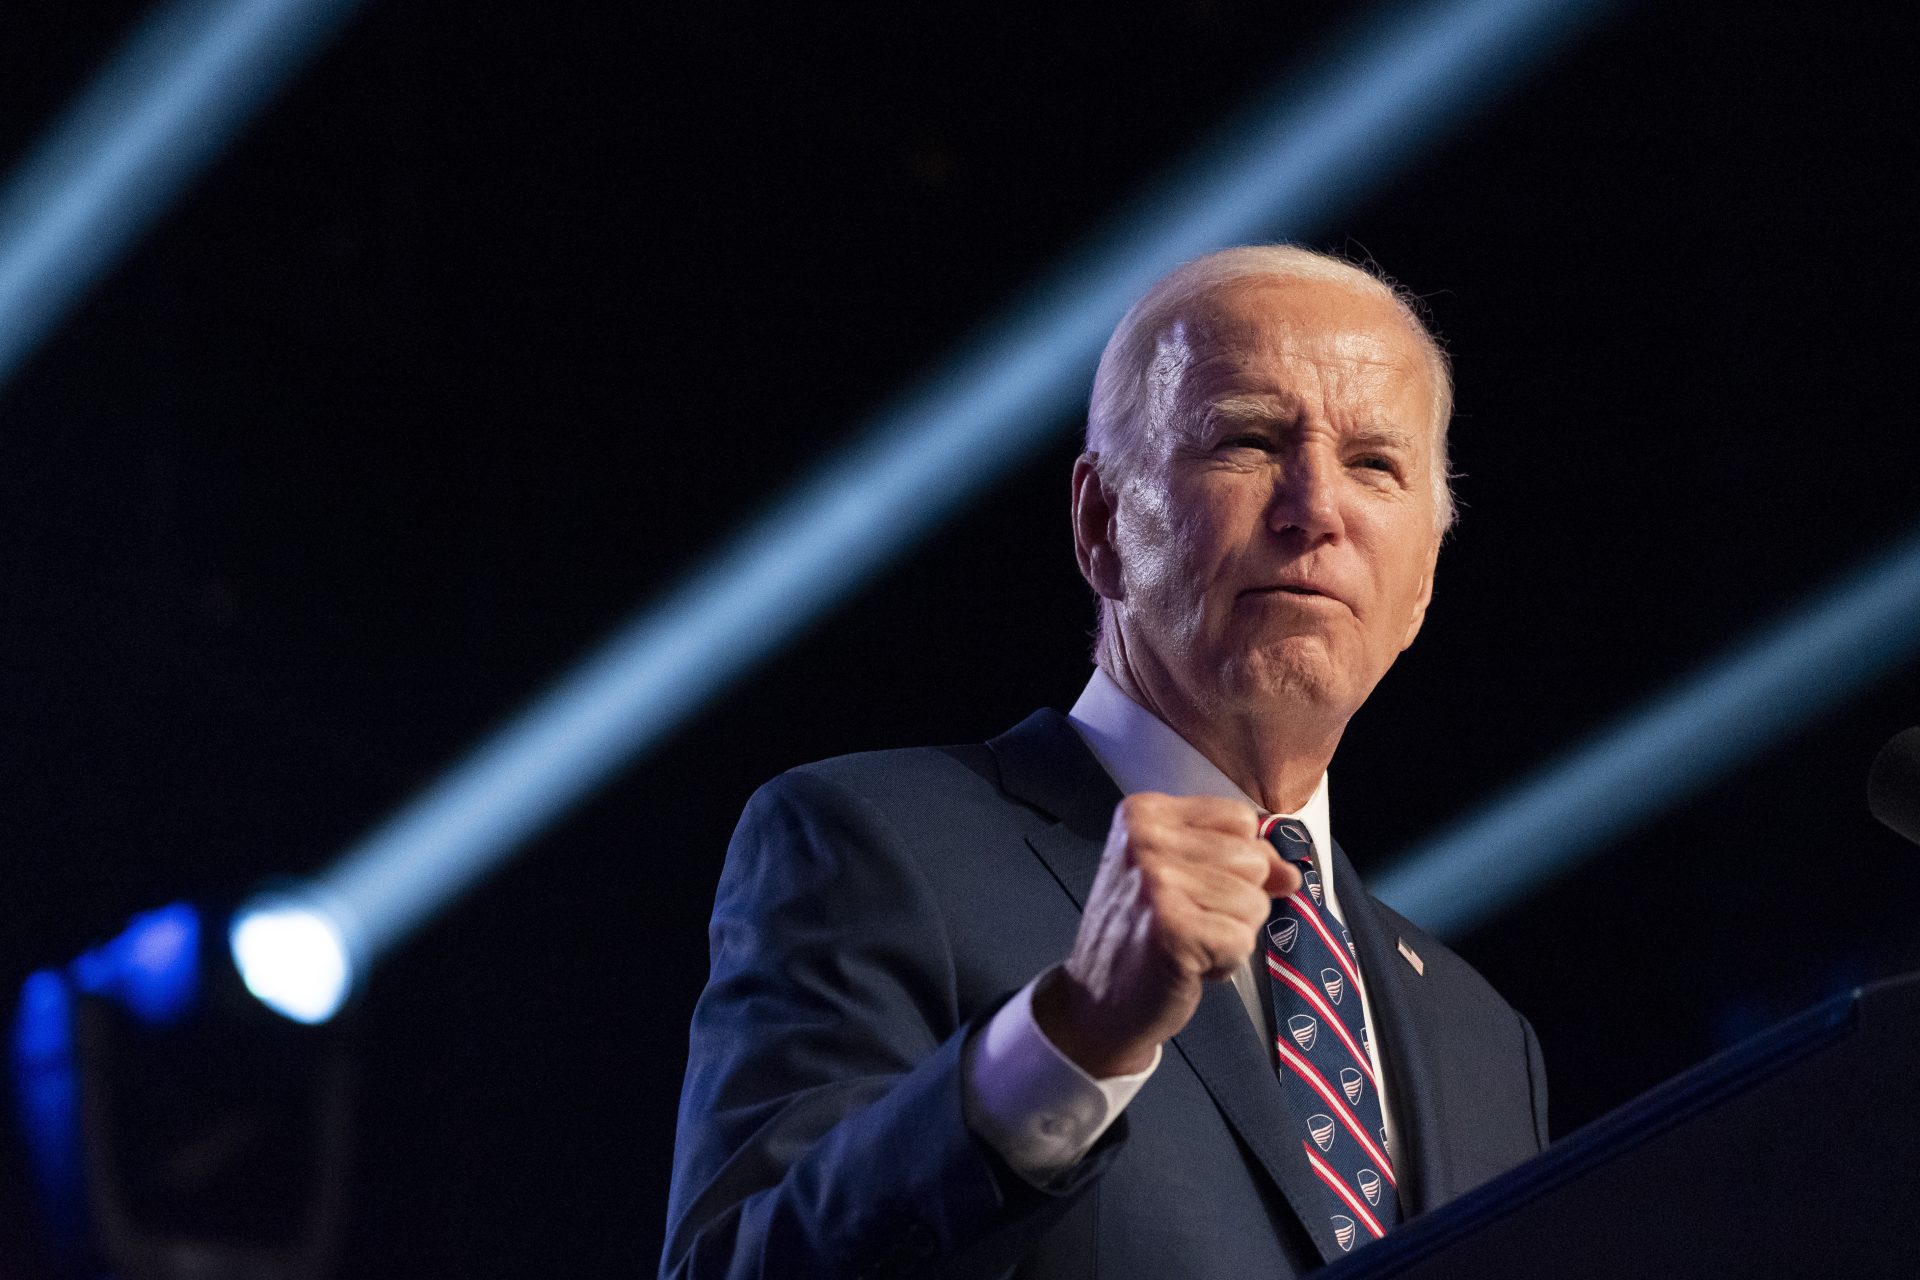 President Joe Biden speaks at a campaign event at Montgomery County Community College in Blue Bell, Pa., Jan. 5, 2024. Voters in more than 50 countries that are home to half the world’s population are eligible to vote in elections in 2024.